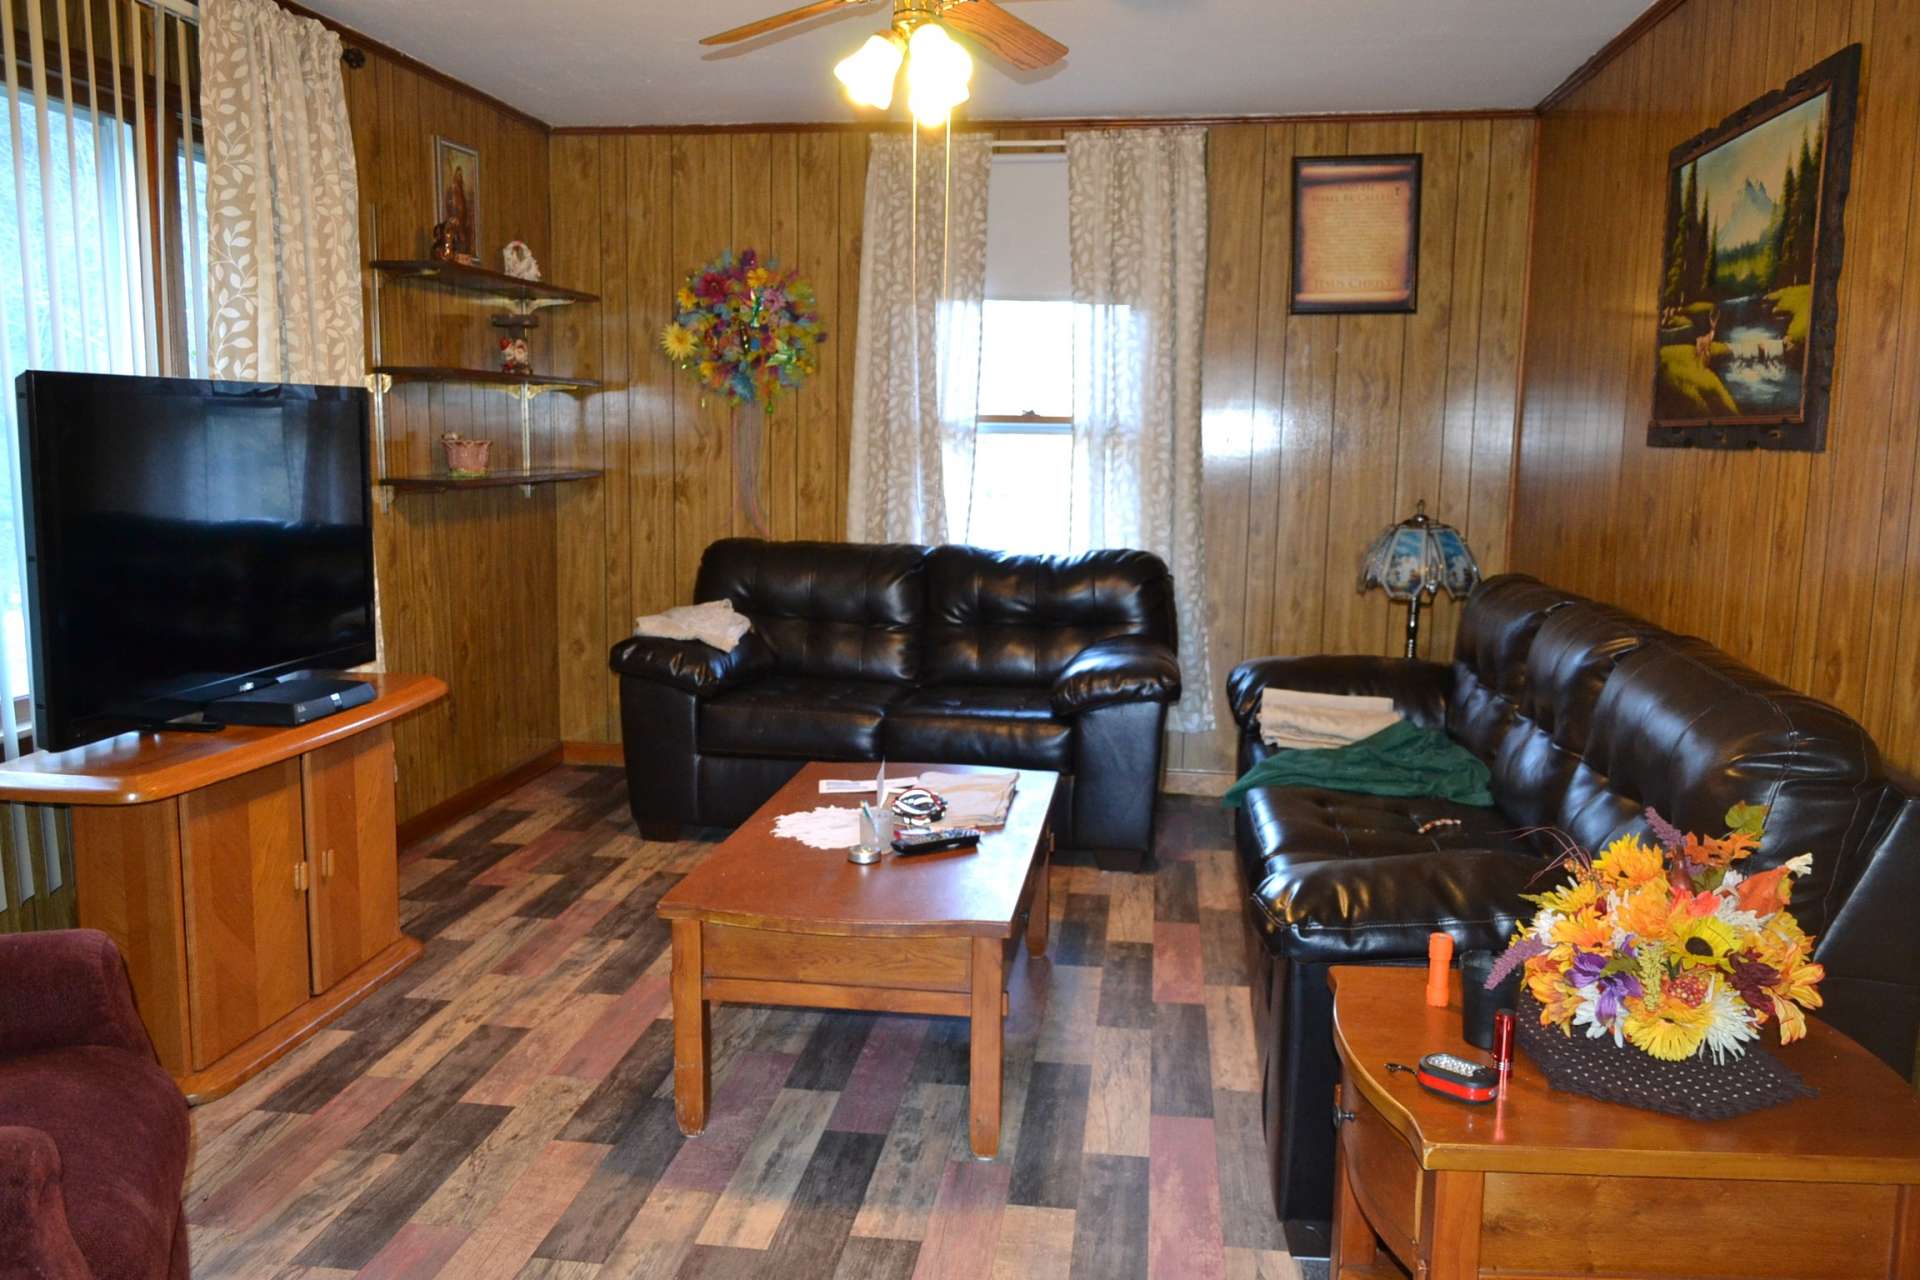 This is the living room with new vinyl flooring, paneled walls, and lots of character.